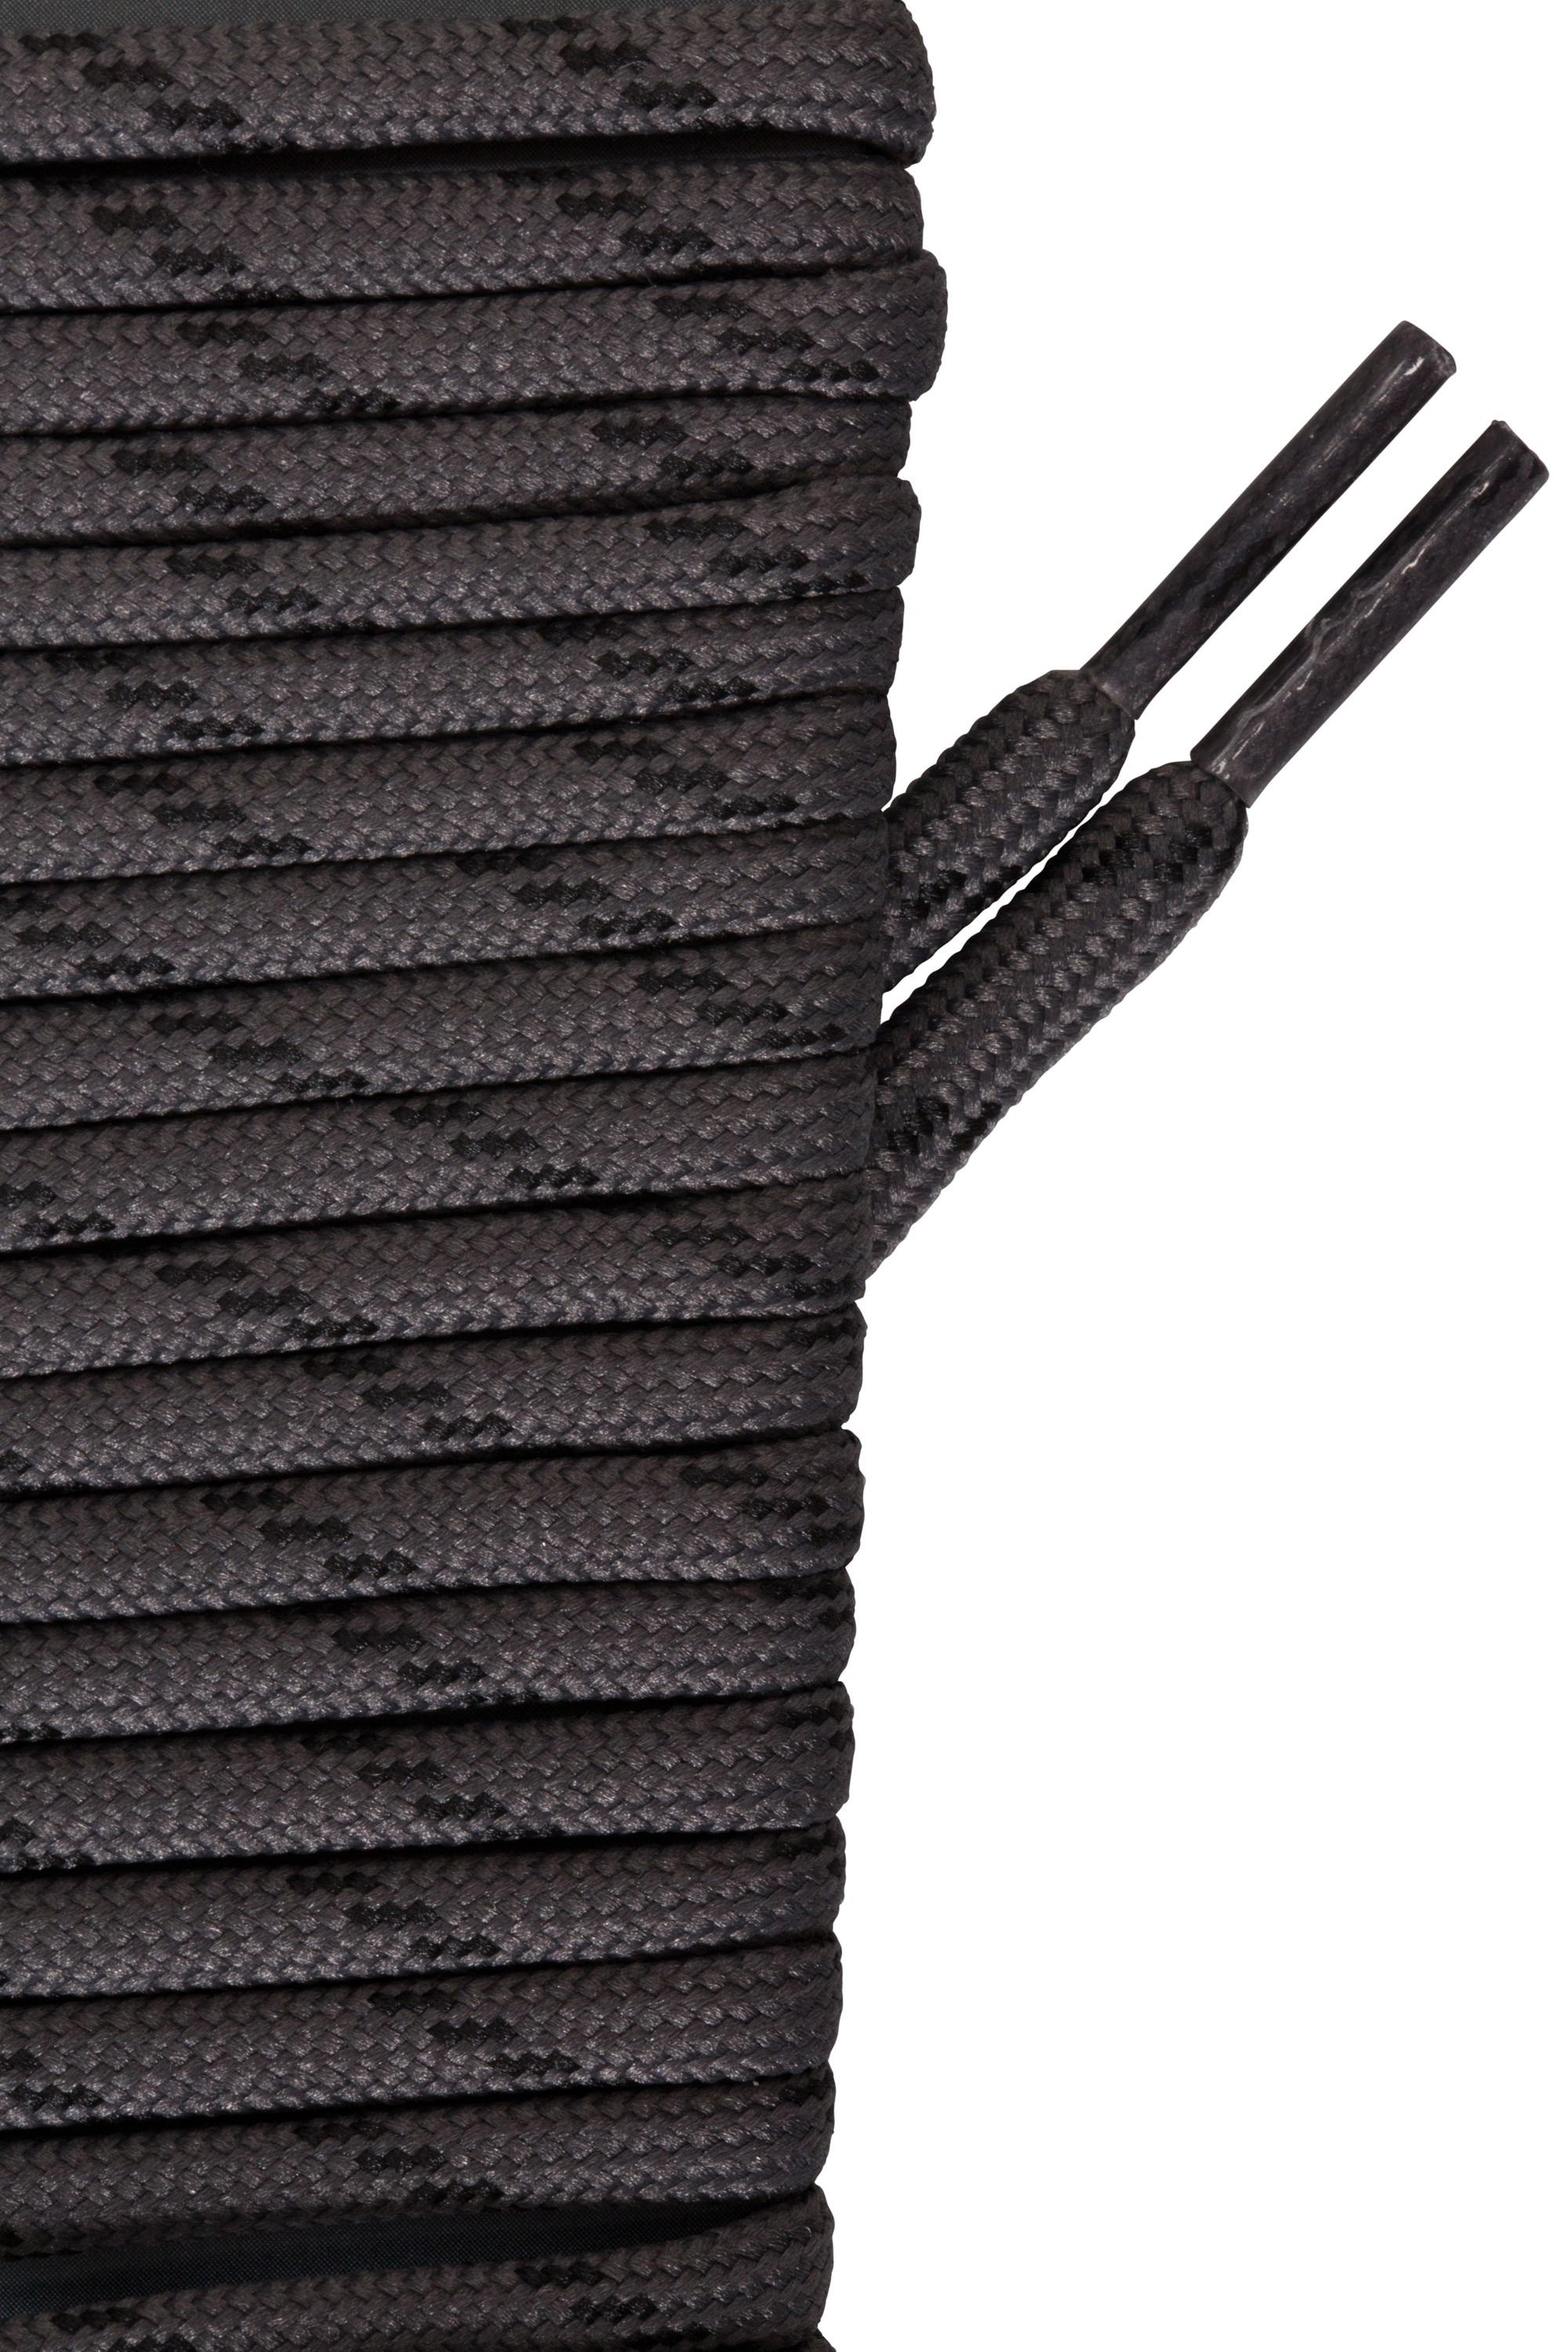 Mountain Warehouse Footwear Accessories Round Textured Shoe Laces 100cm 